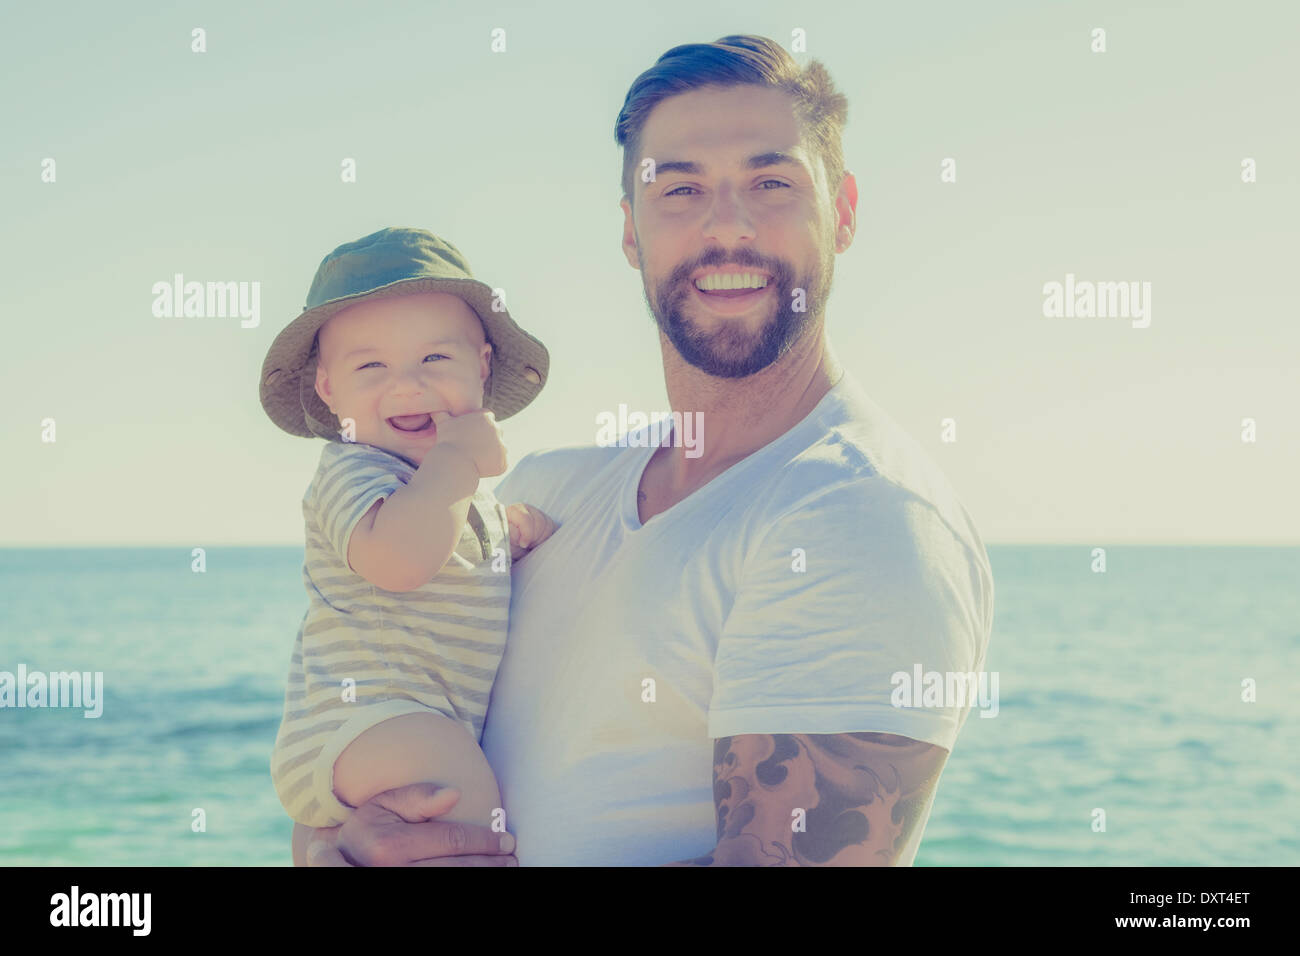 Portrait of father and baby son smiling on sunny beach Stock Photo